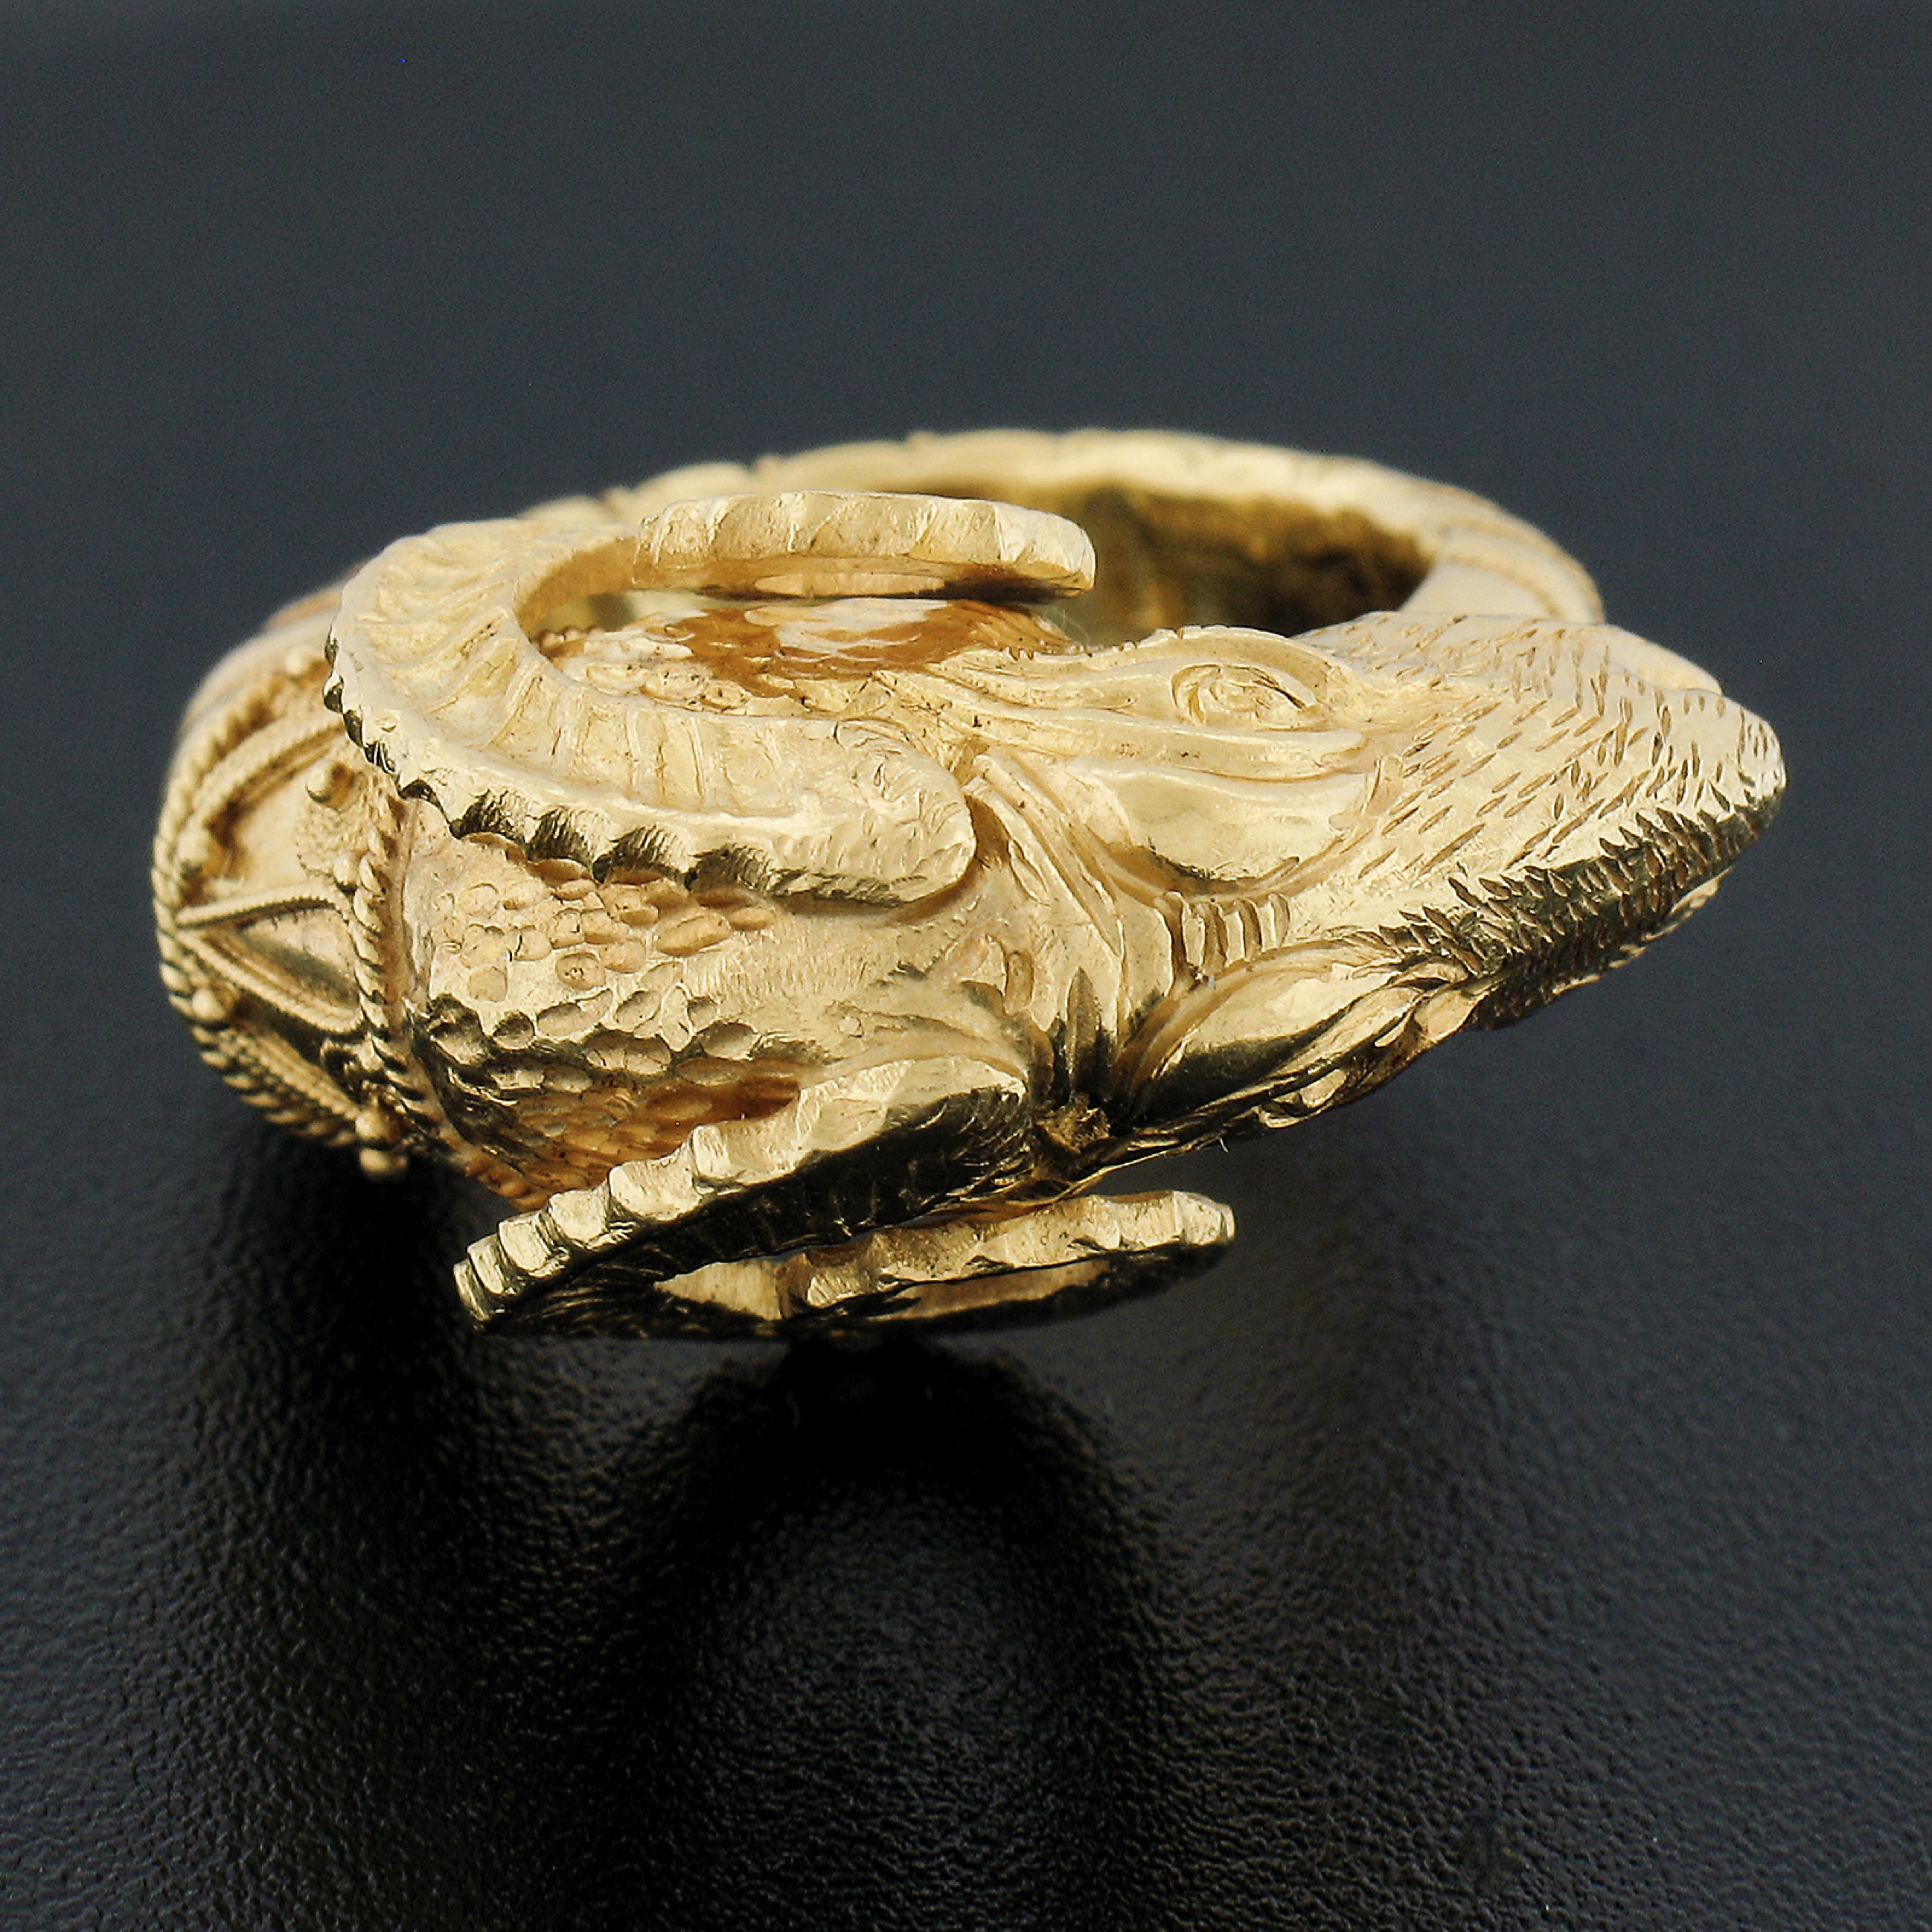 Greece Solid 22K Yellow Gold Detailed 3D Ram's Head Handmade Band Ring Size 7 In Excellent Condition For Sale In Montclair, NJ